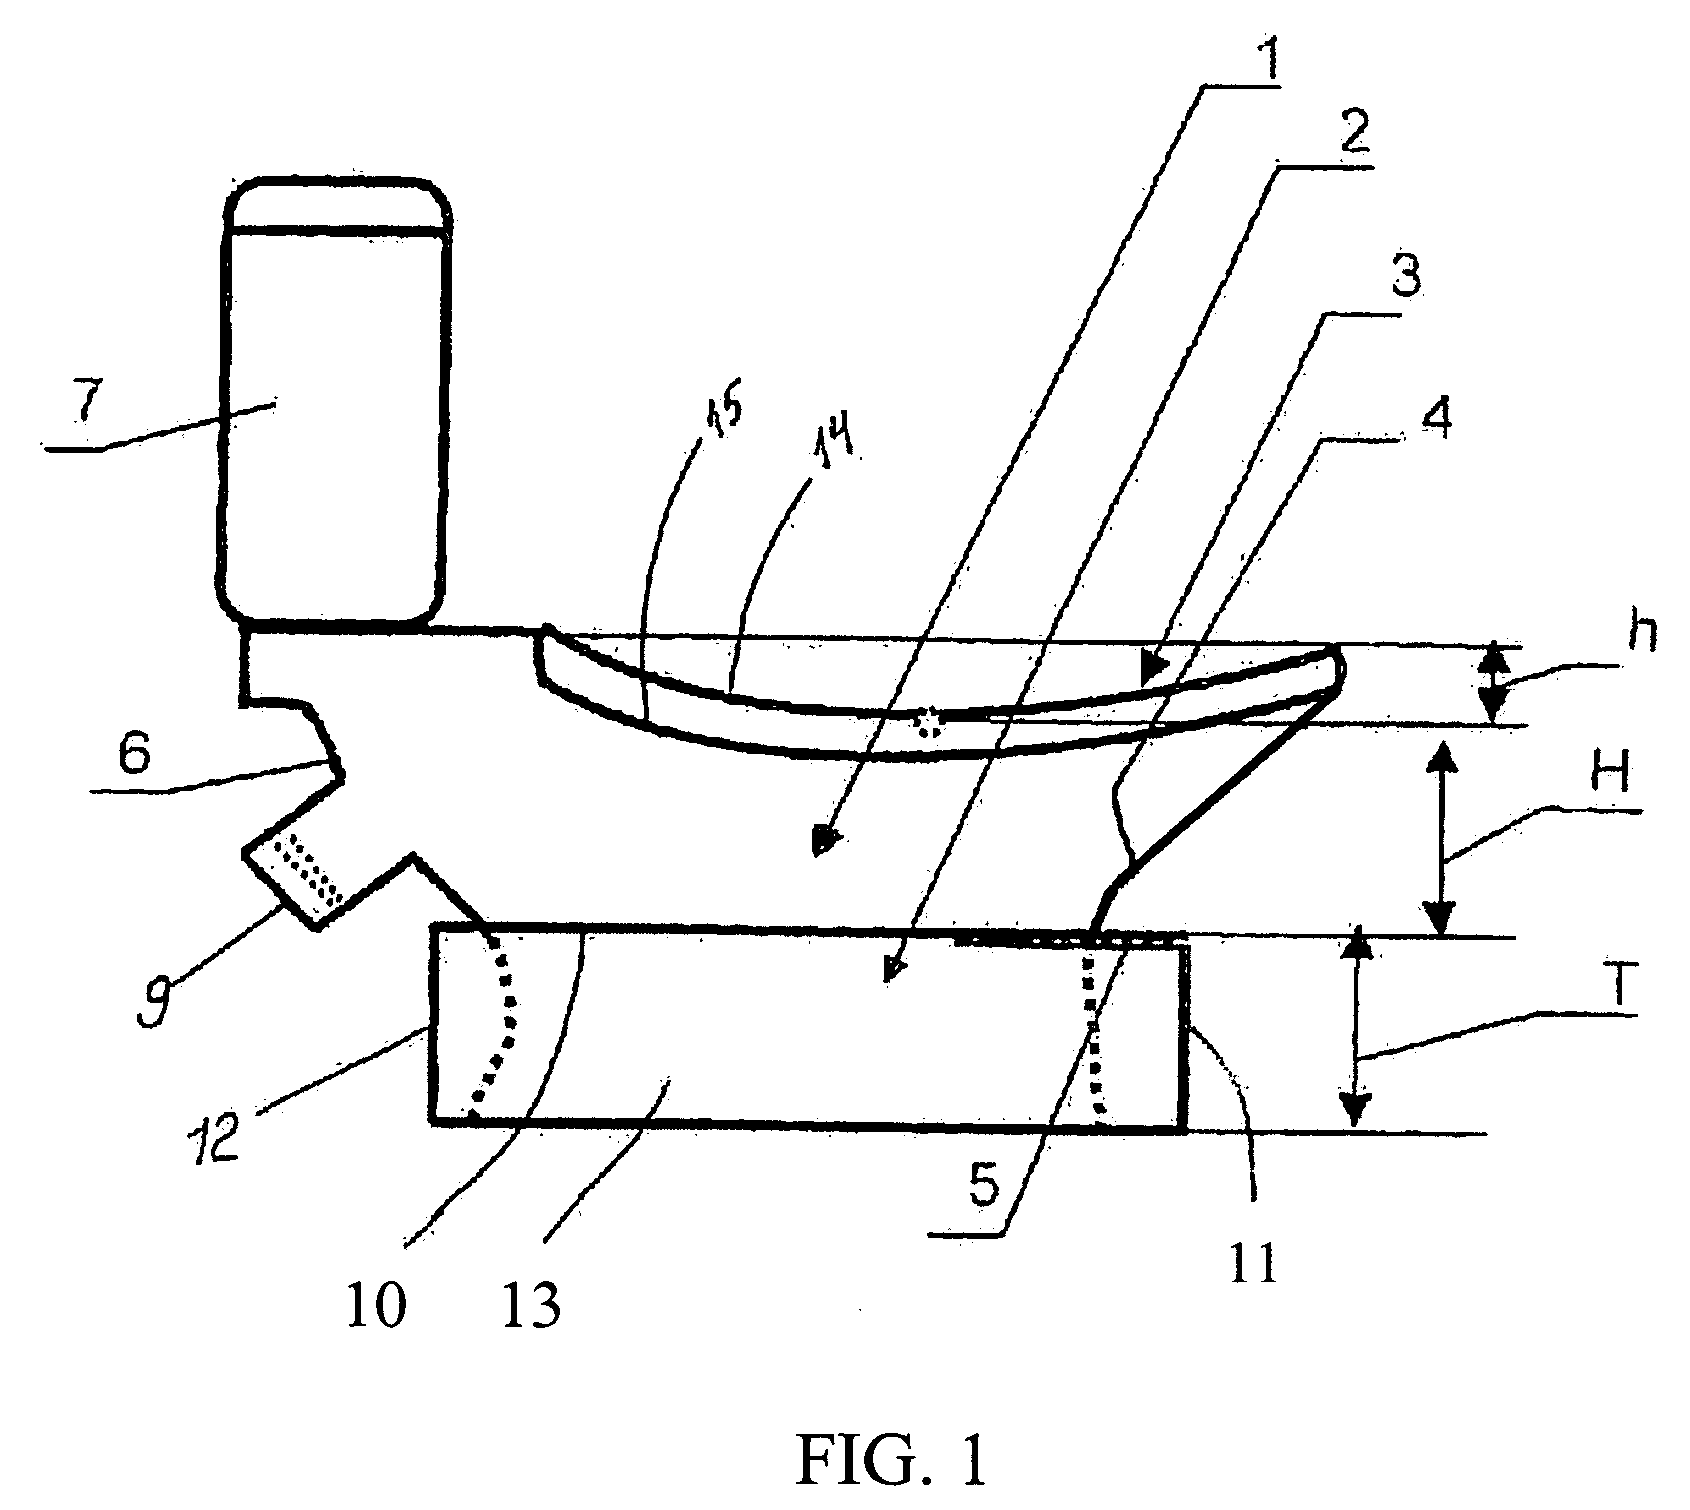 Toilet apparatus providing a user with a physiologically natural position during bowel movement